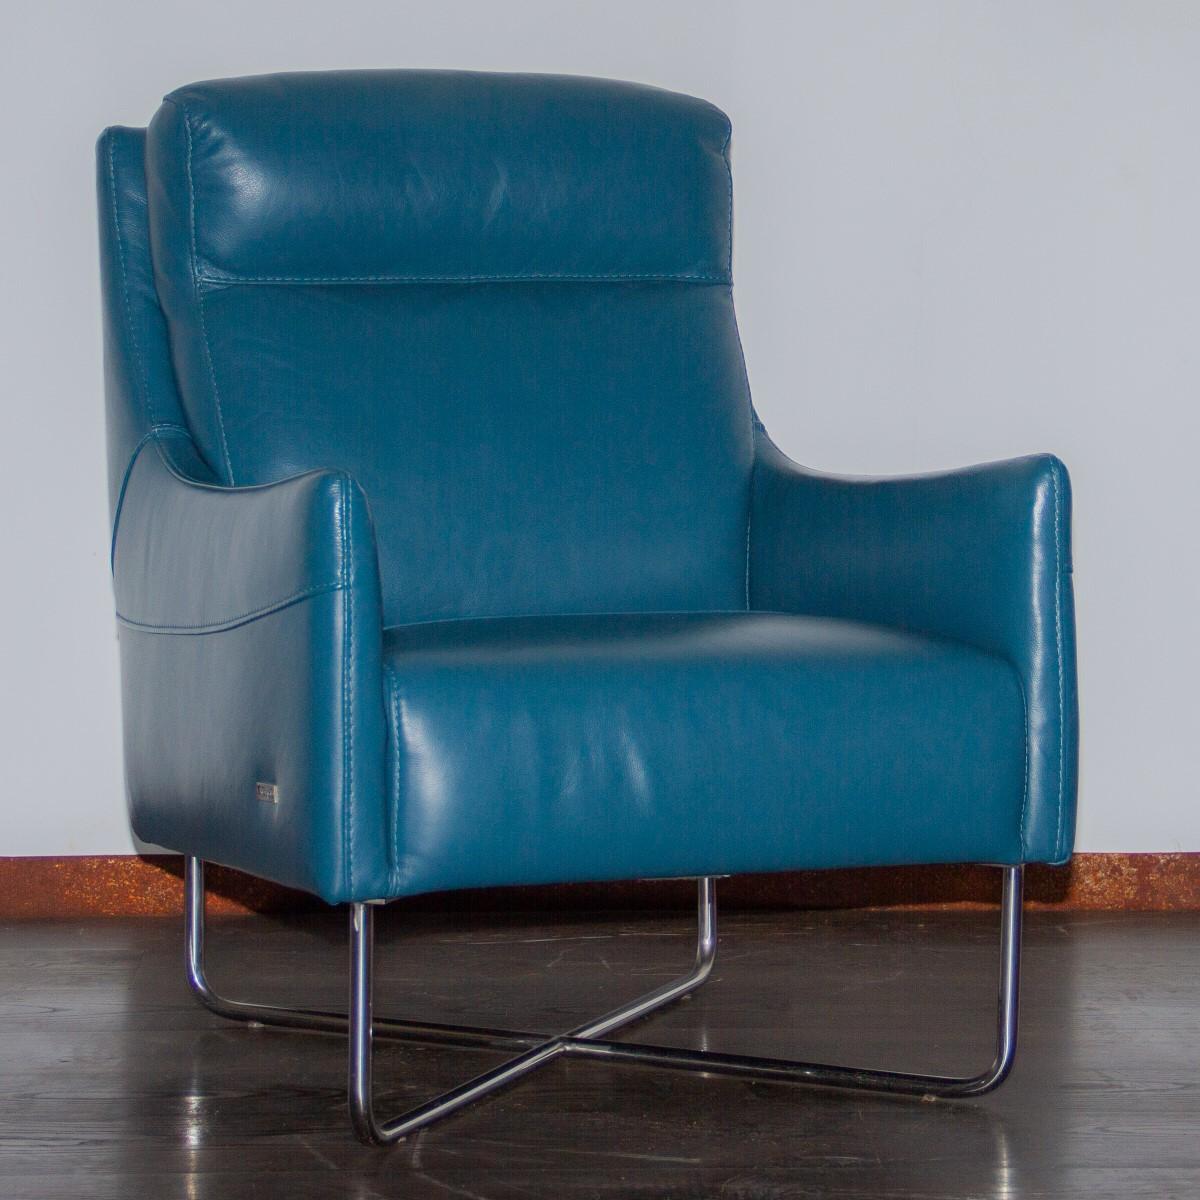 A 1990s vibrant blue leather armchair with down swept arms set on a chrome crossed frame by Violino. 

Excellent condition and very comfortable.